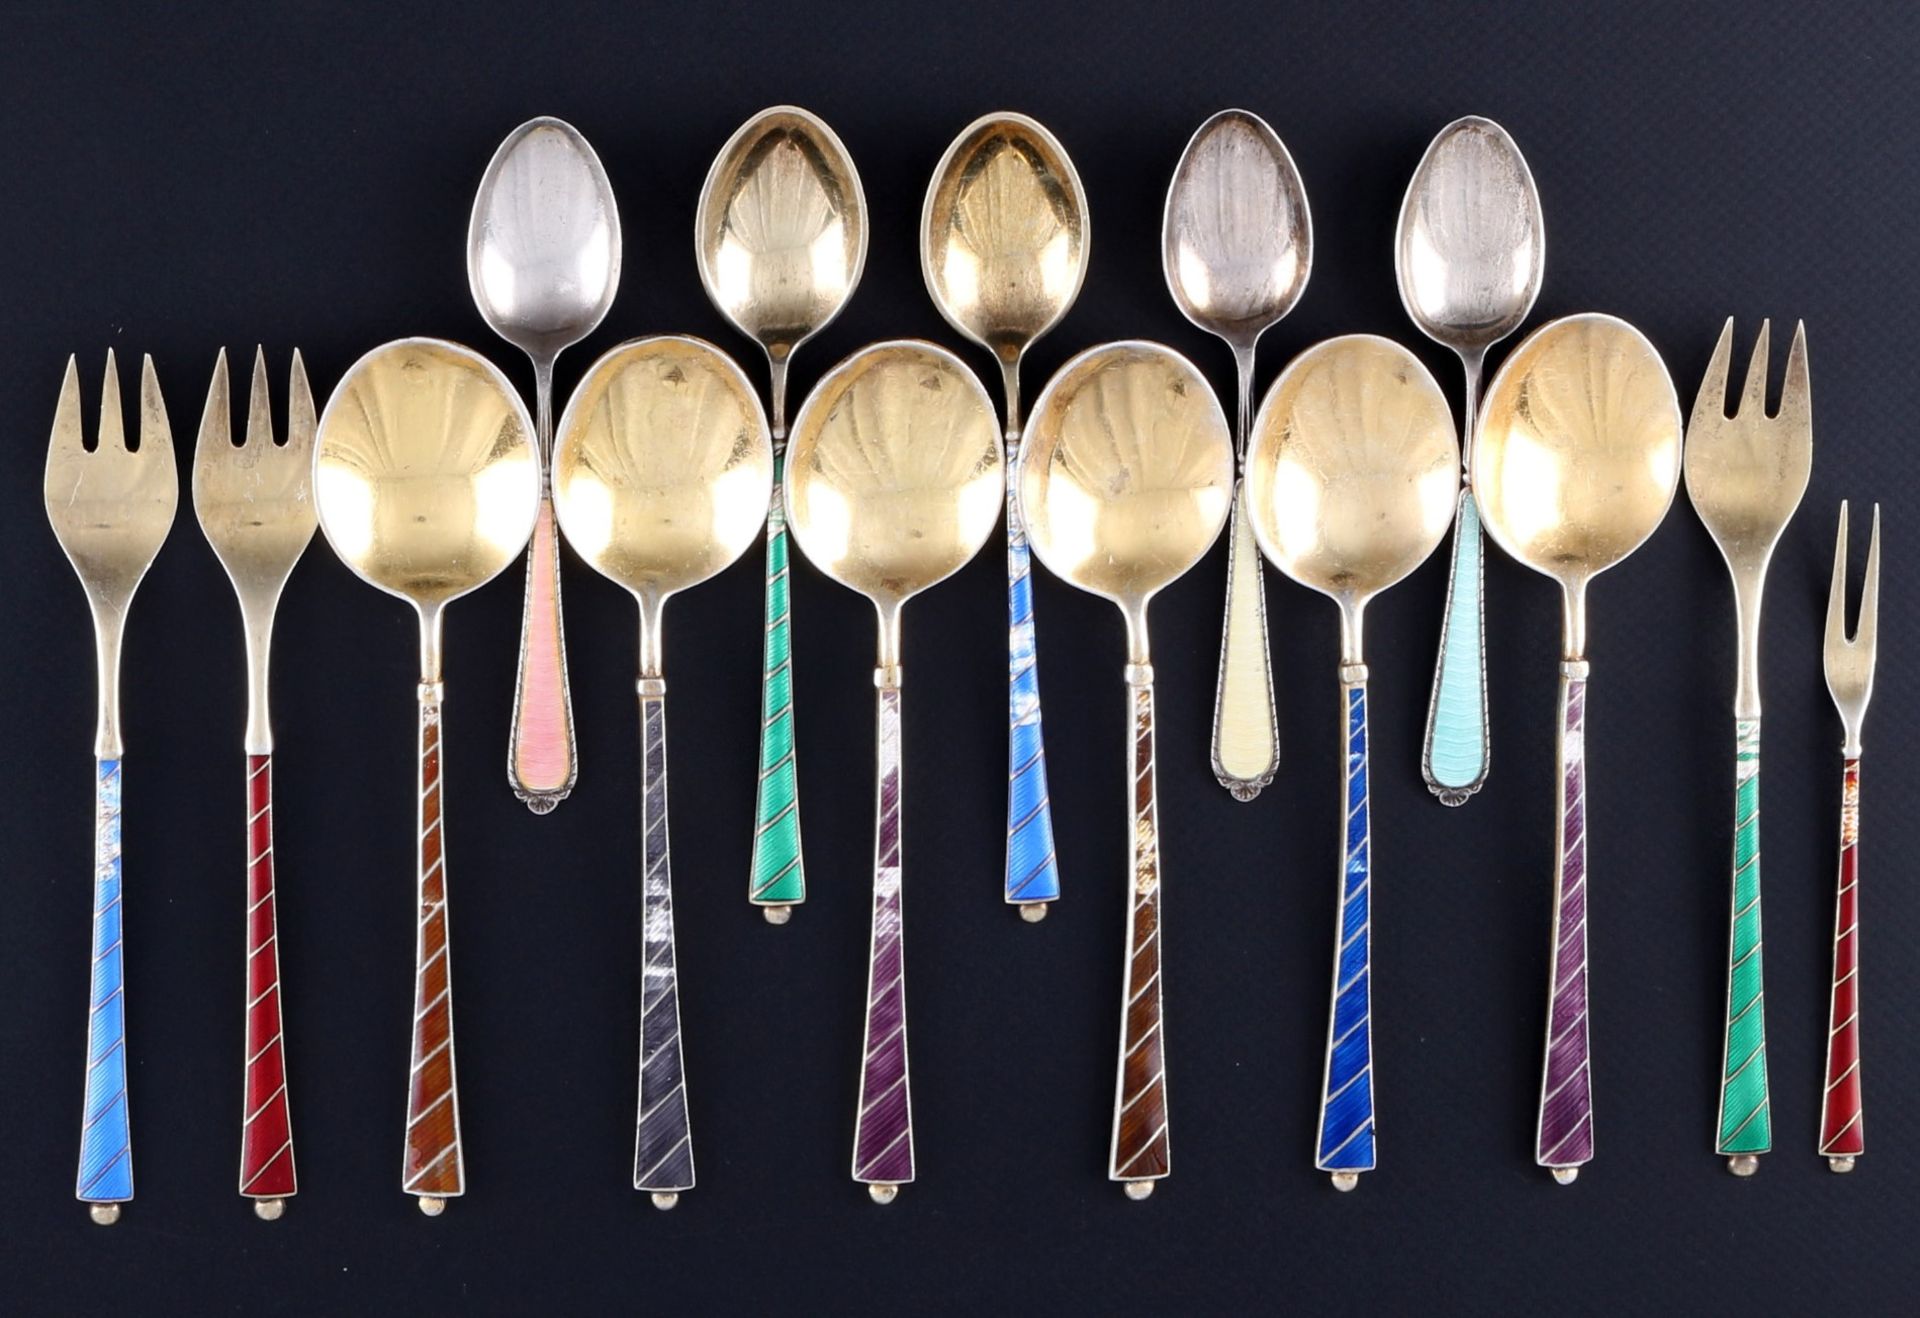 925 silver 15 enameled cutlery pieces, sterling silver 15 pieces enamel silver cutlery,